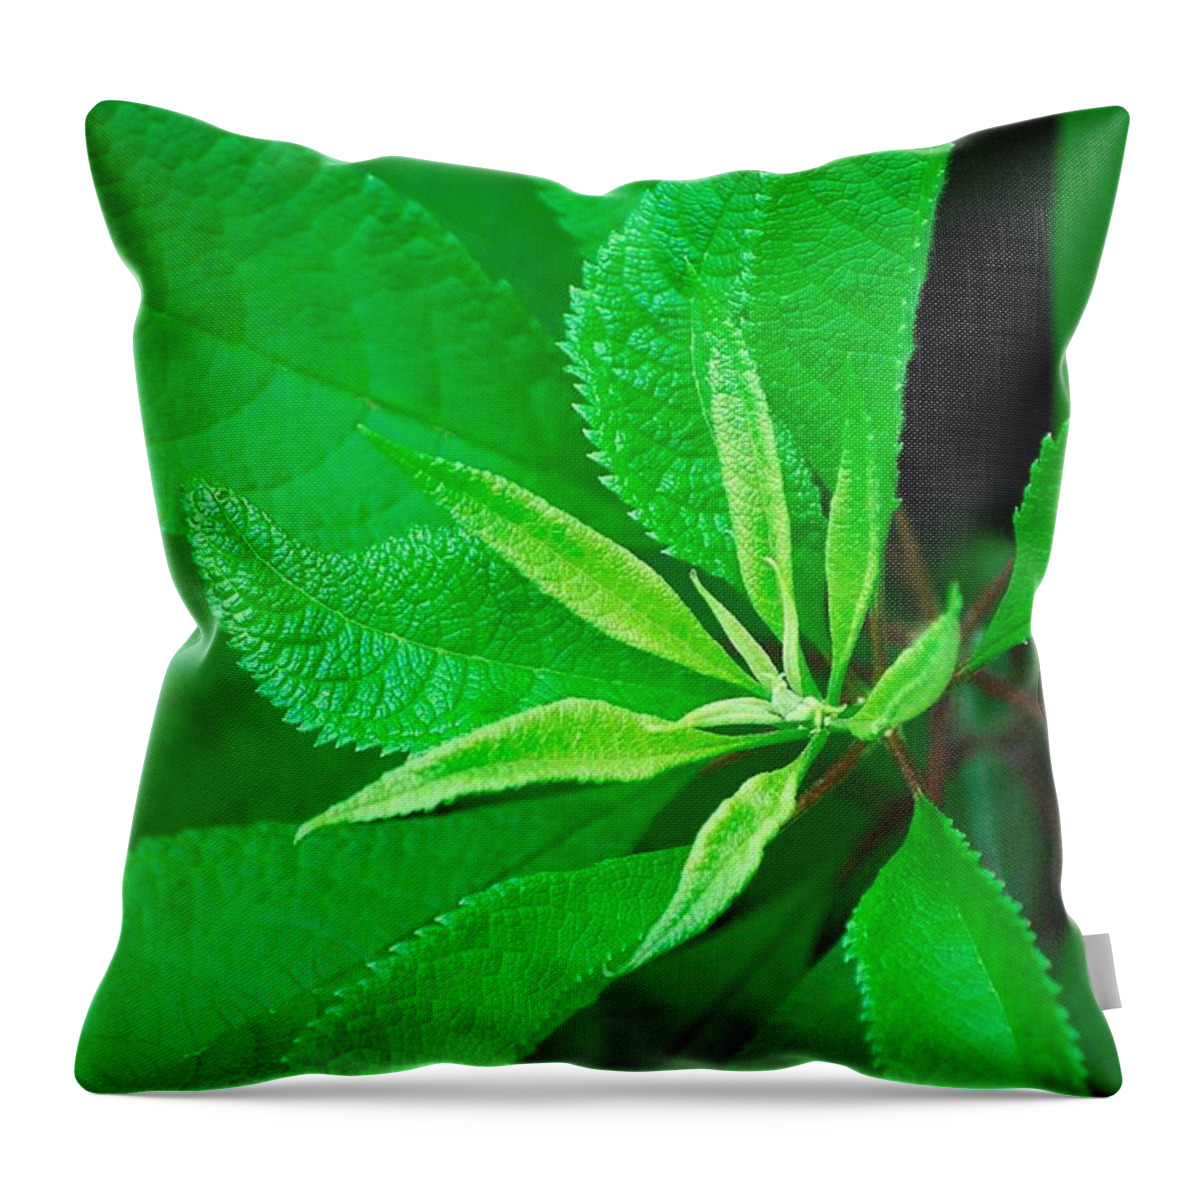 Green Throw Pillow featuring the photograph Green by Ludwig Keck